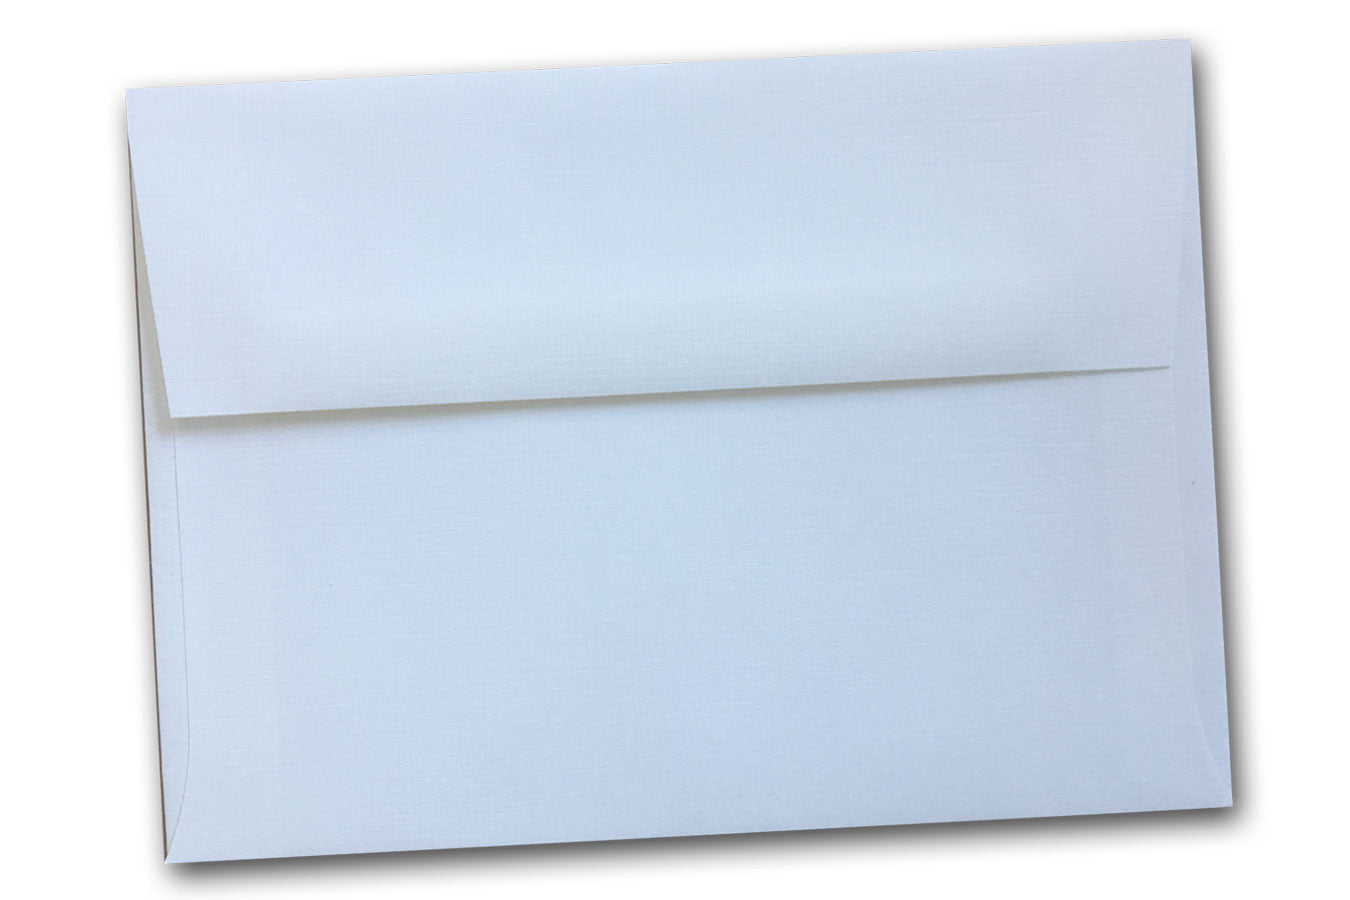 Premium Linen A9 Envelopes for DIY invitations and greeting cards ...